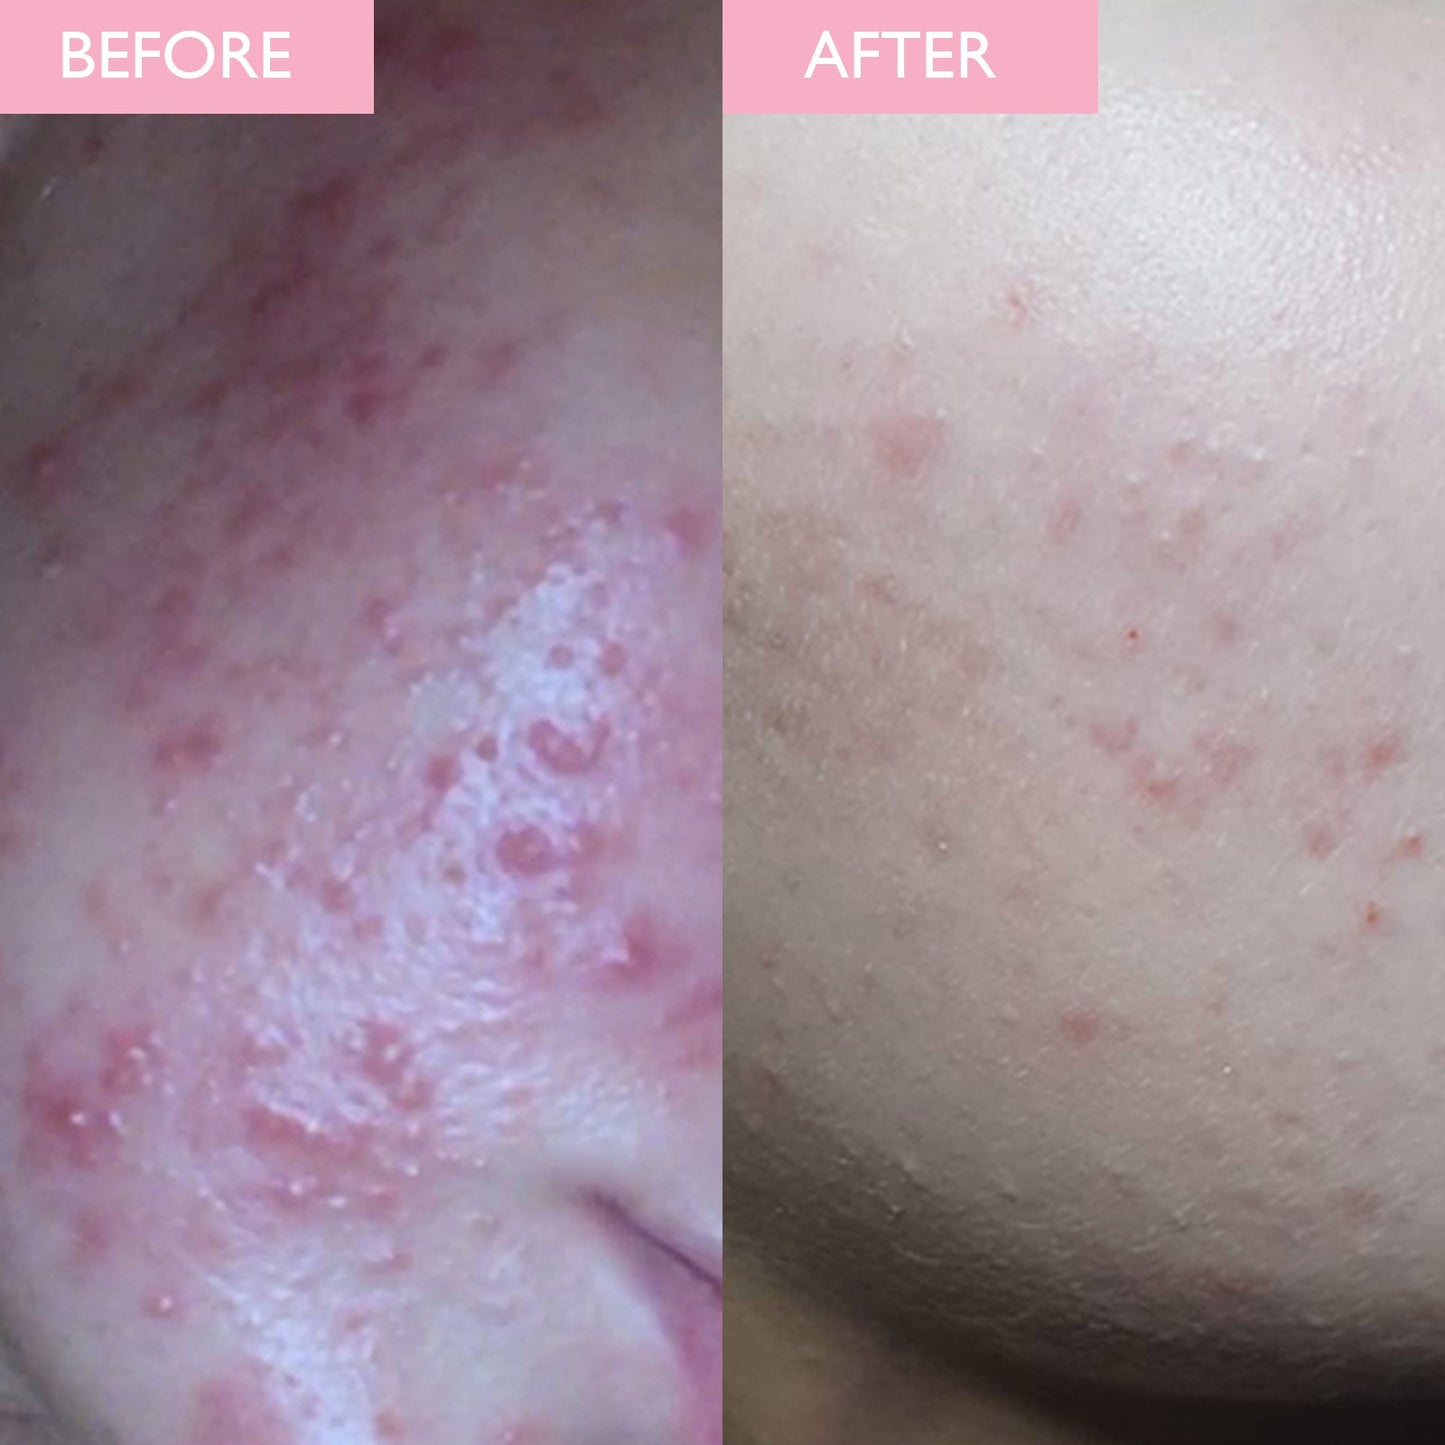 Before and After image showing a dramatic improvement in red infammed acne.  Skin appears calmed, smoother and with less red spots.